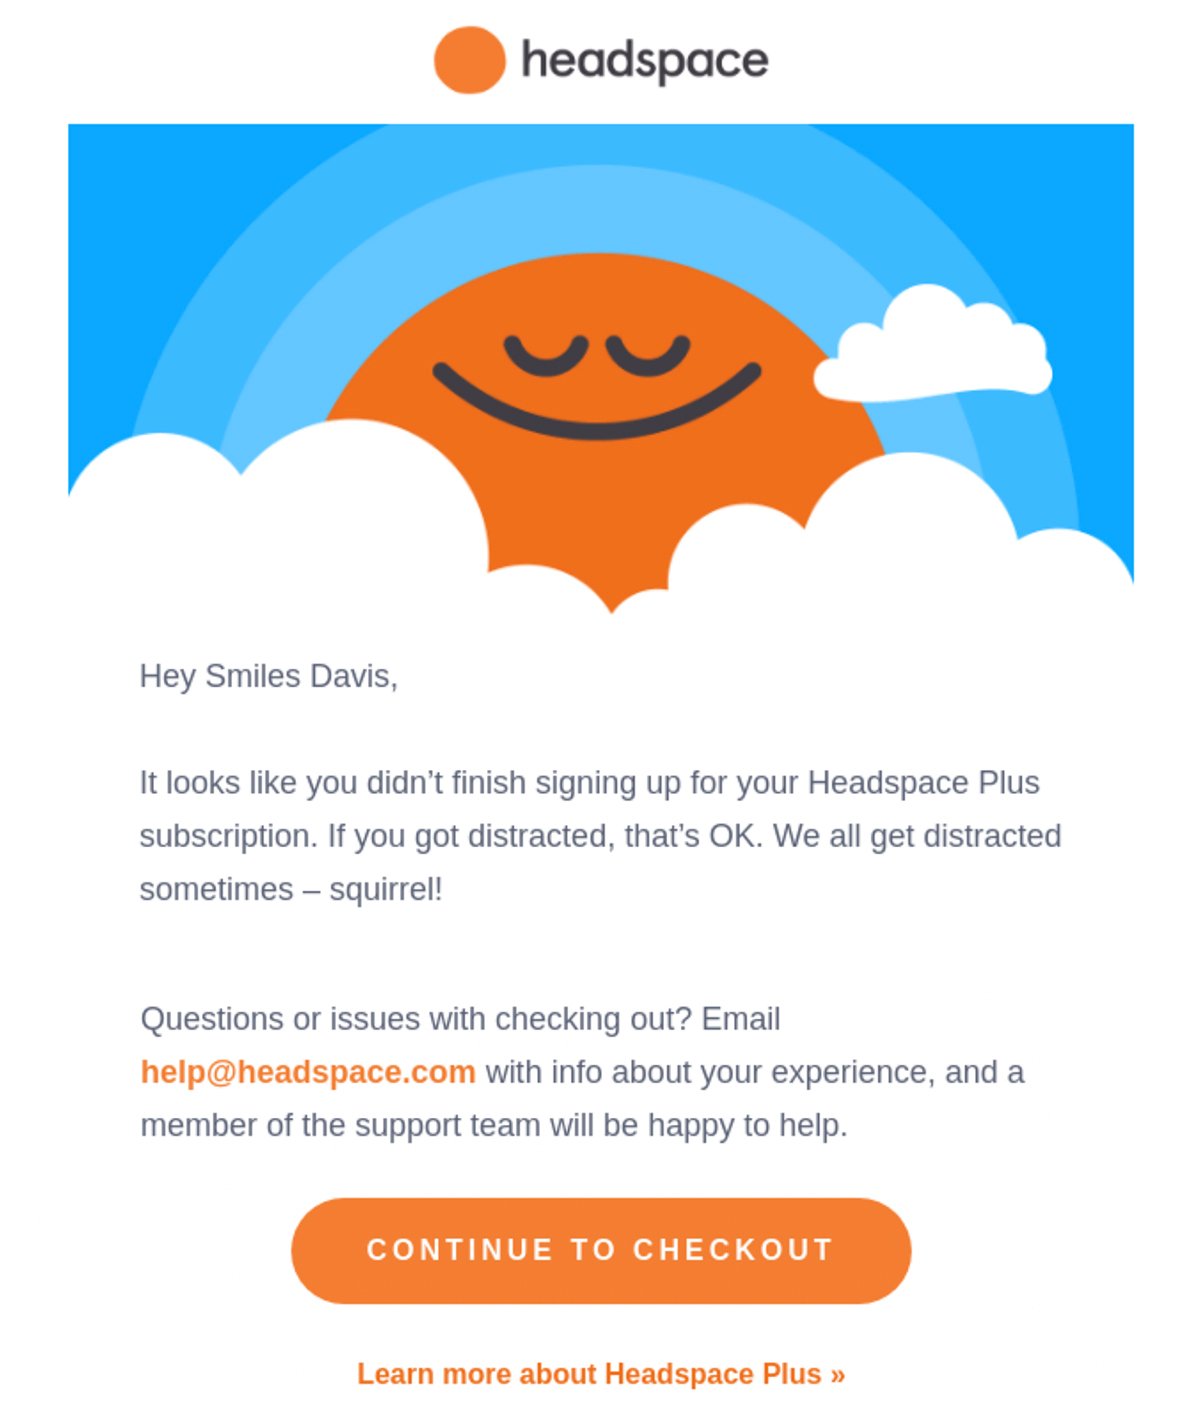 Abandoned cart email - headspace